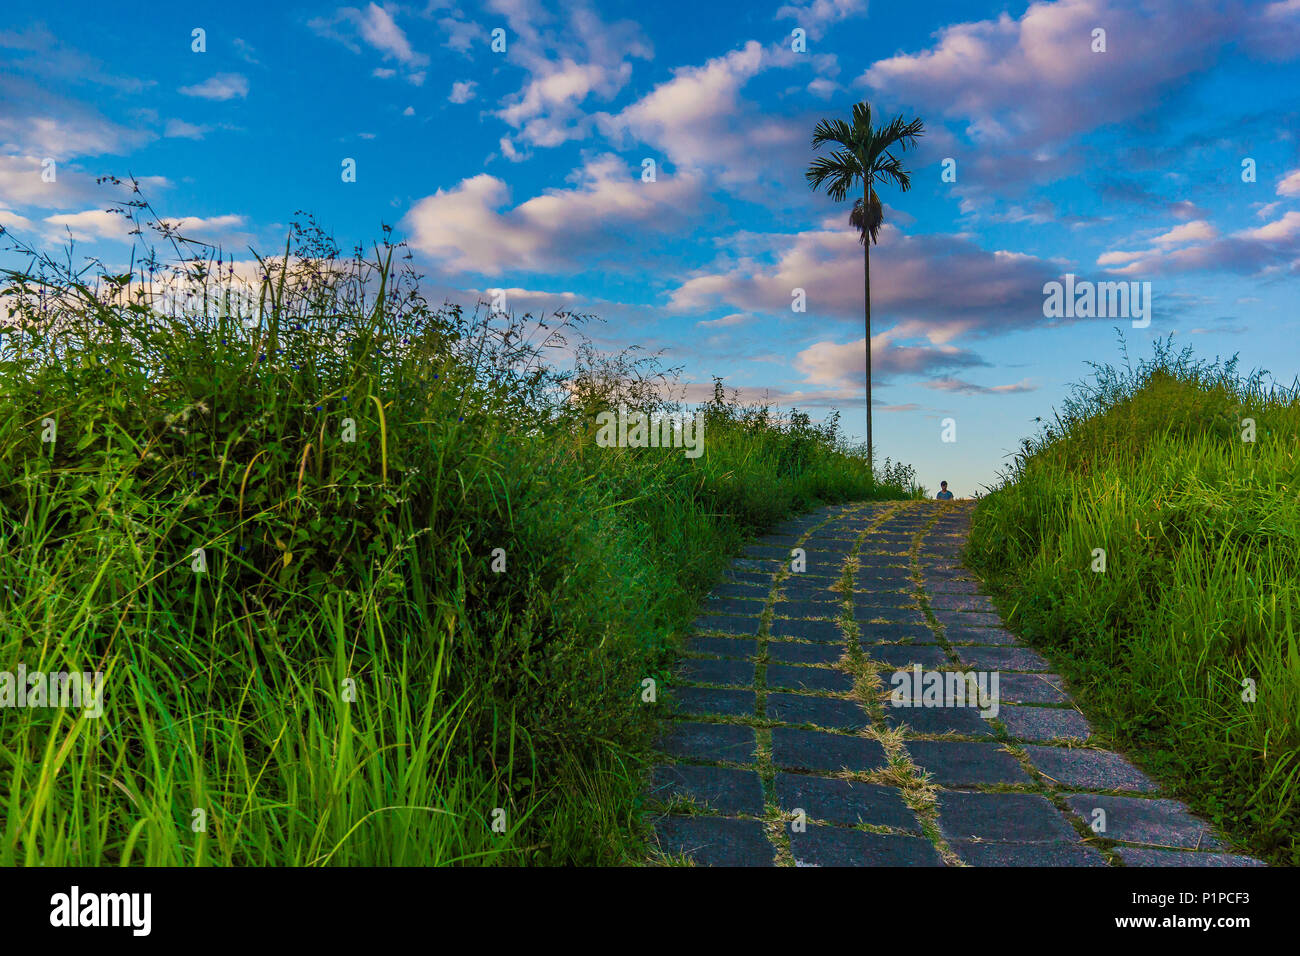 Campuhan Ridge Walk in the morning twilight, a paved pathway over the hills  outside Ubud, Bali, Indonesia, April 15, 2018 Stock Photo